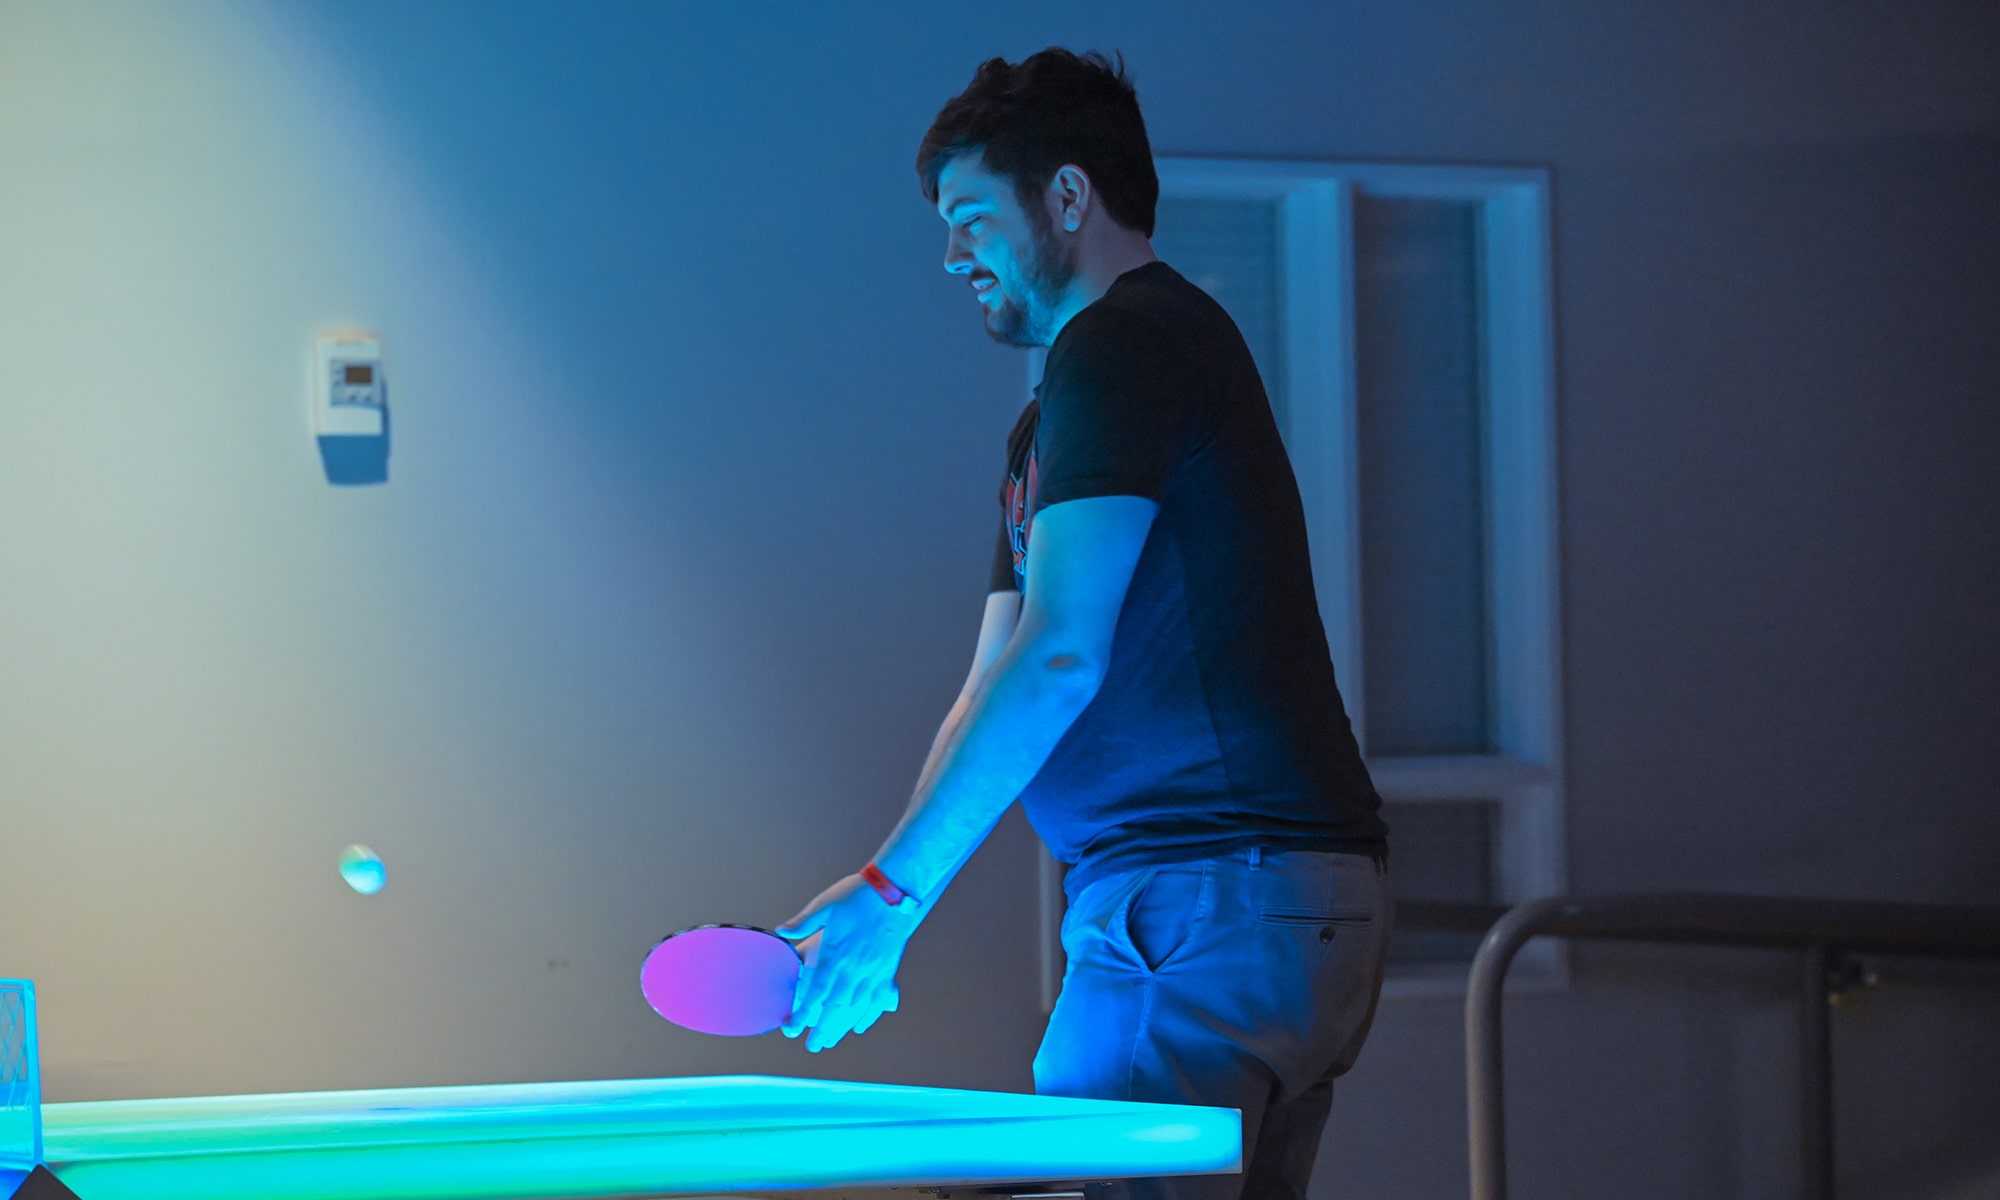 Student playing ping pong